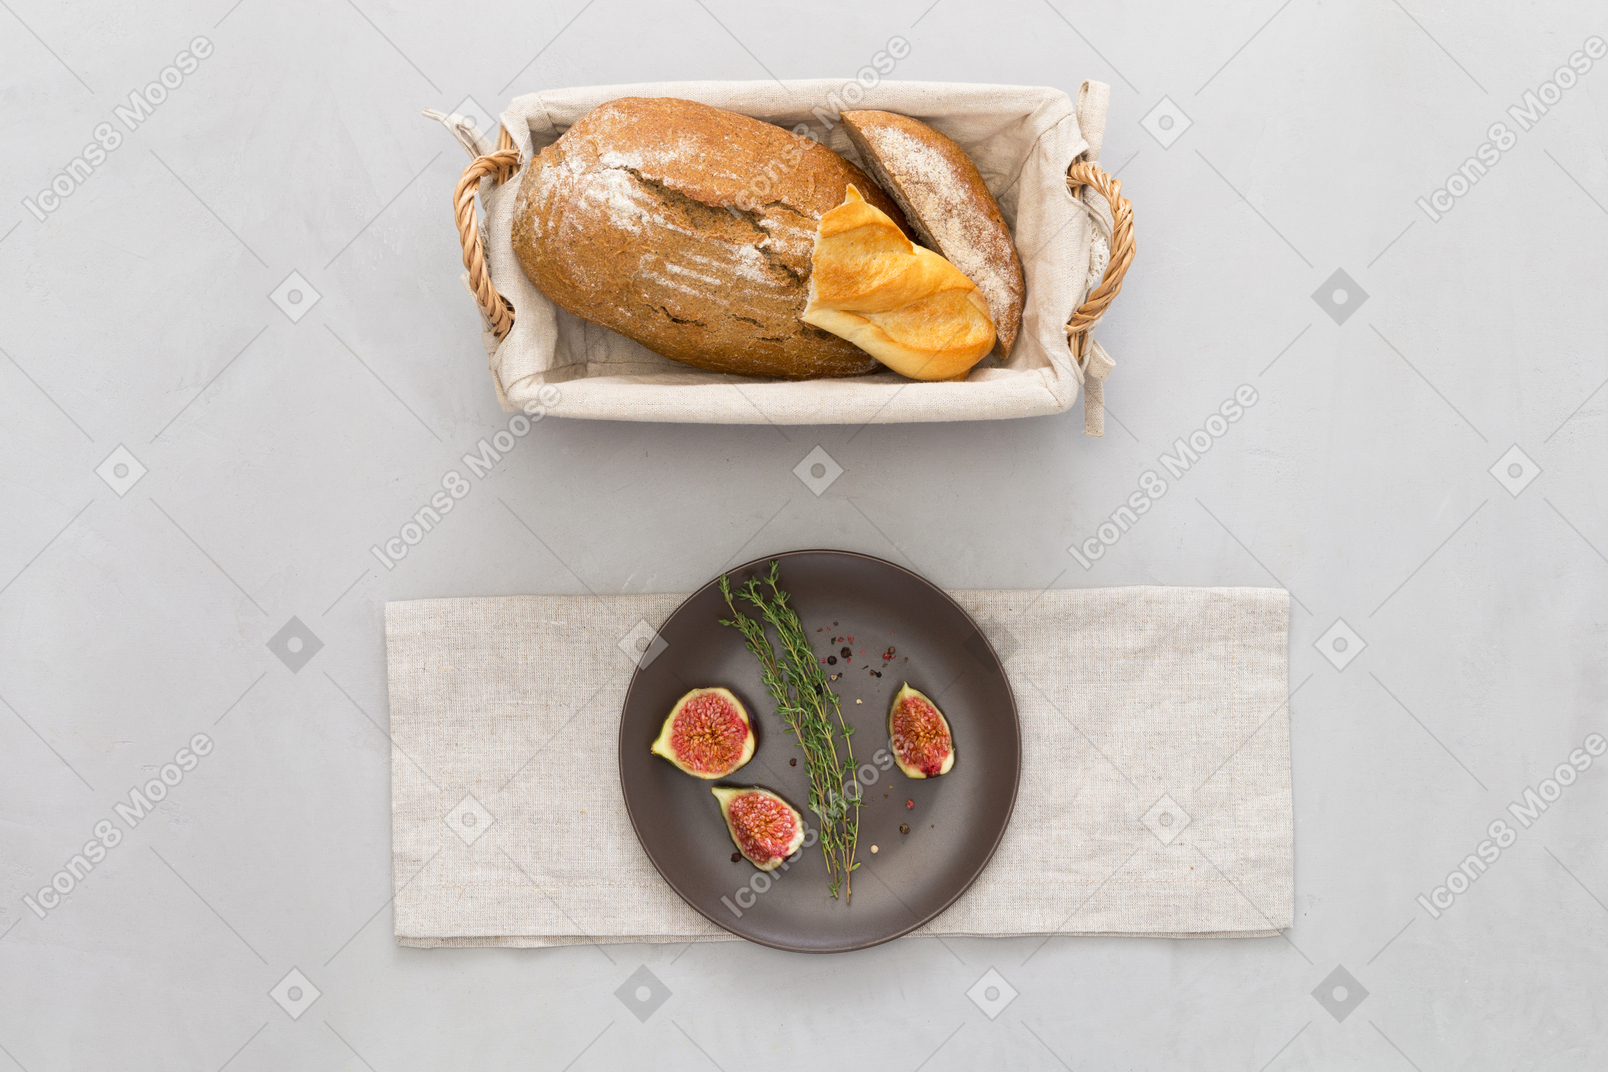 A loaf of bread and some figs on a plate